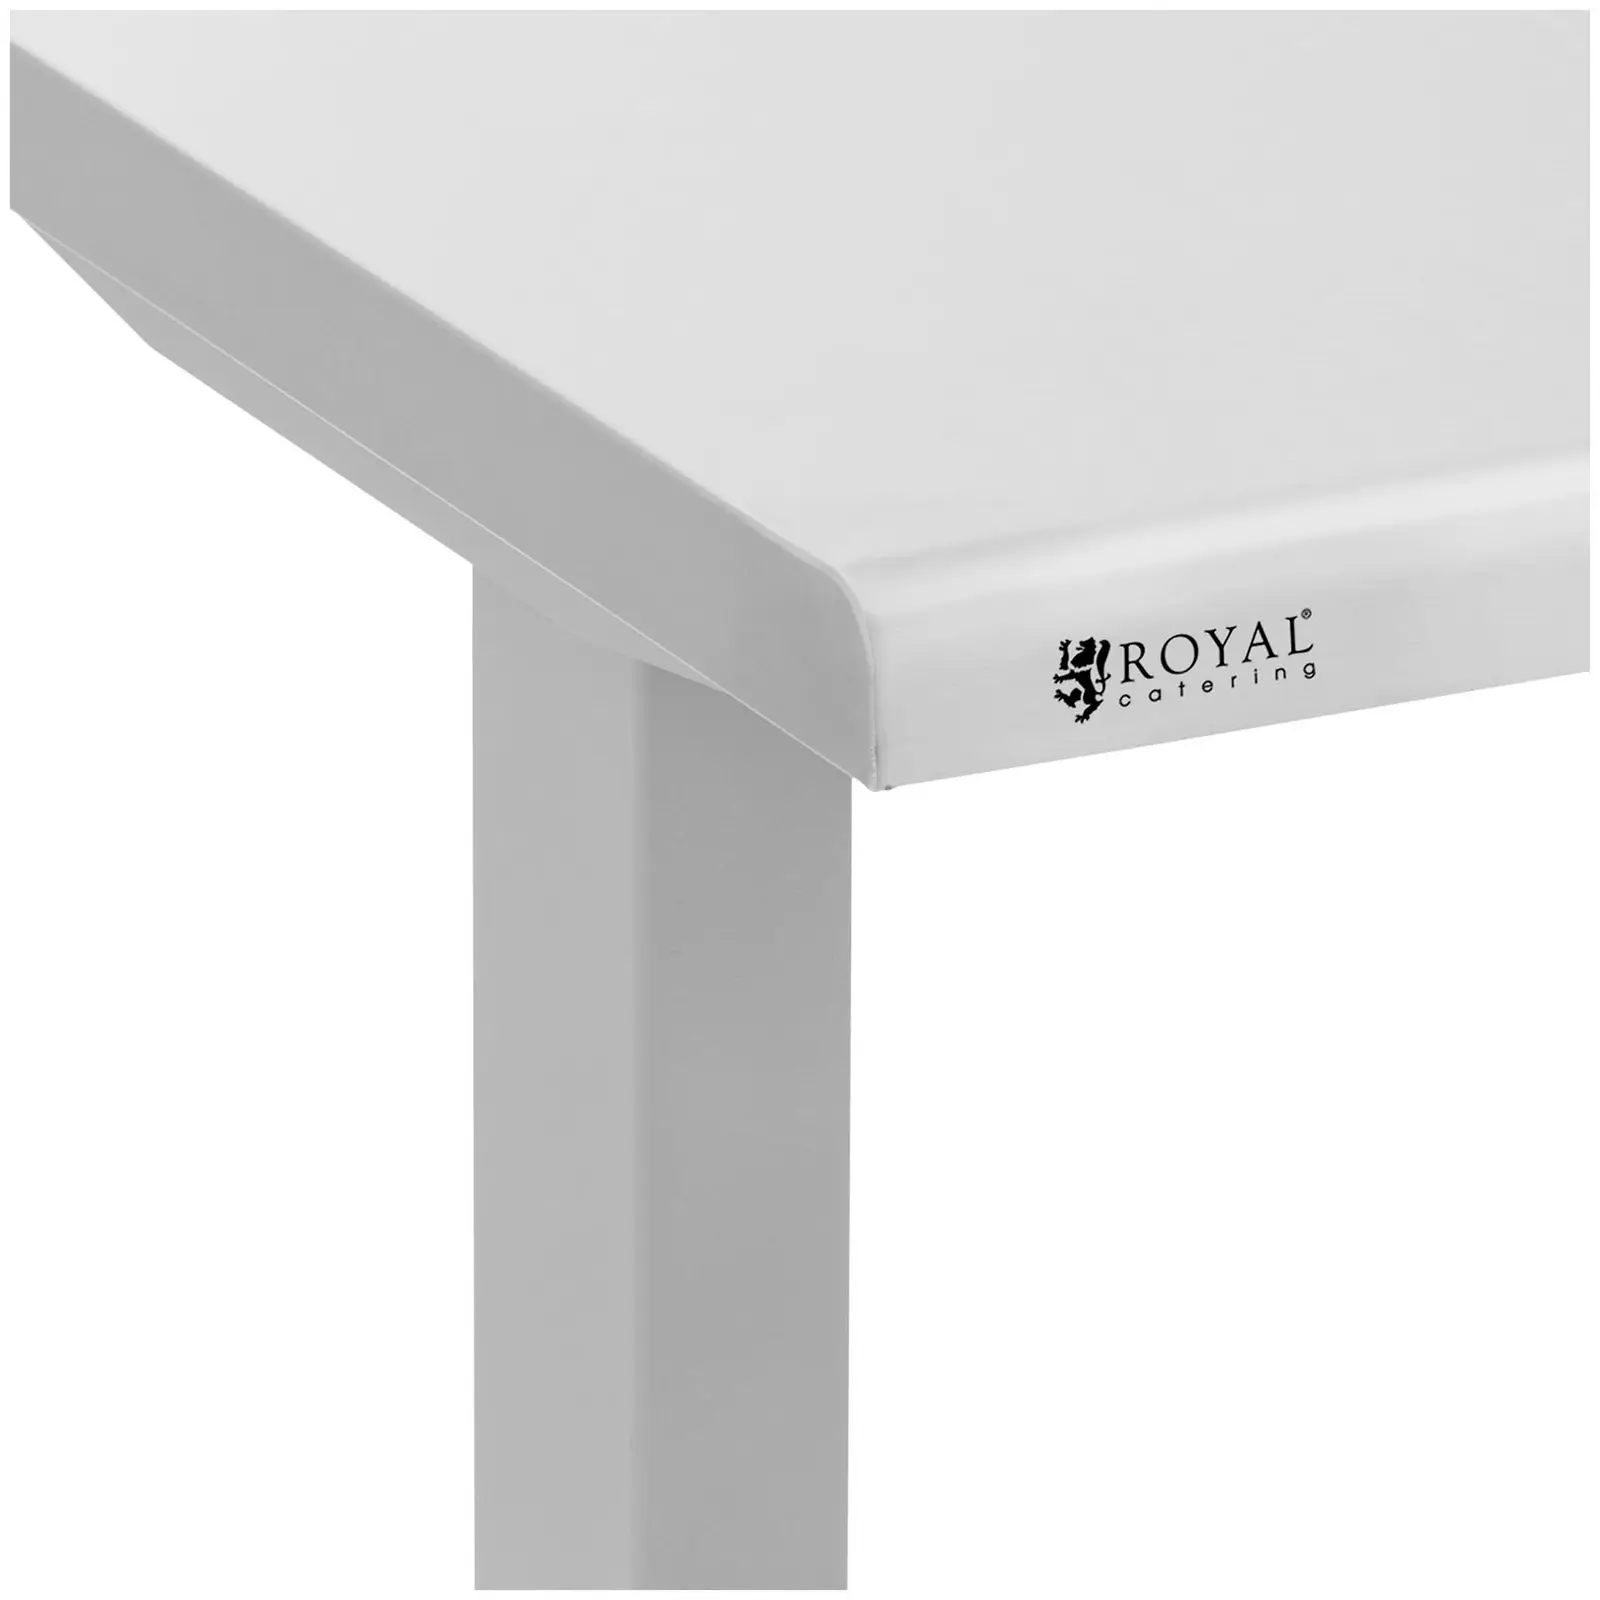 Stainless Steel Table - height adjustable - 126 x 60 x 71,5 - 102 cm - 70 kg load capacity - Royal Catering